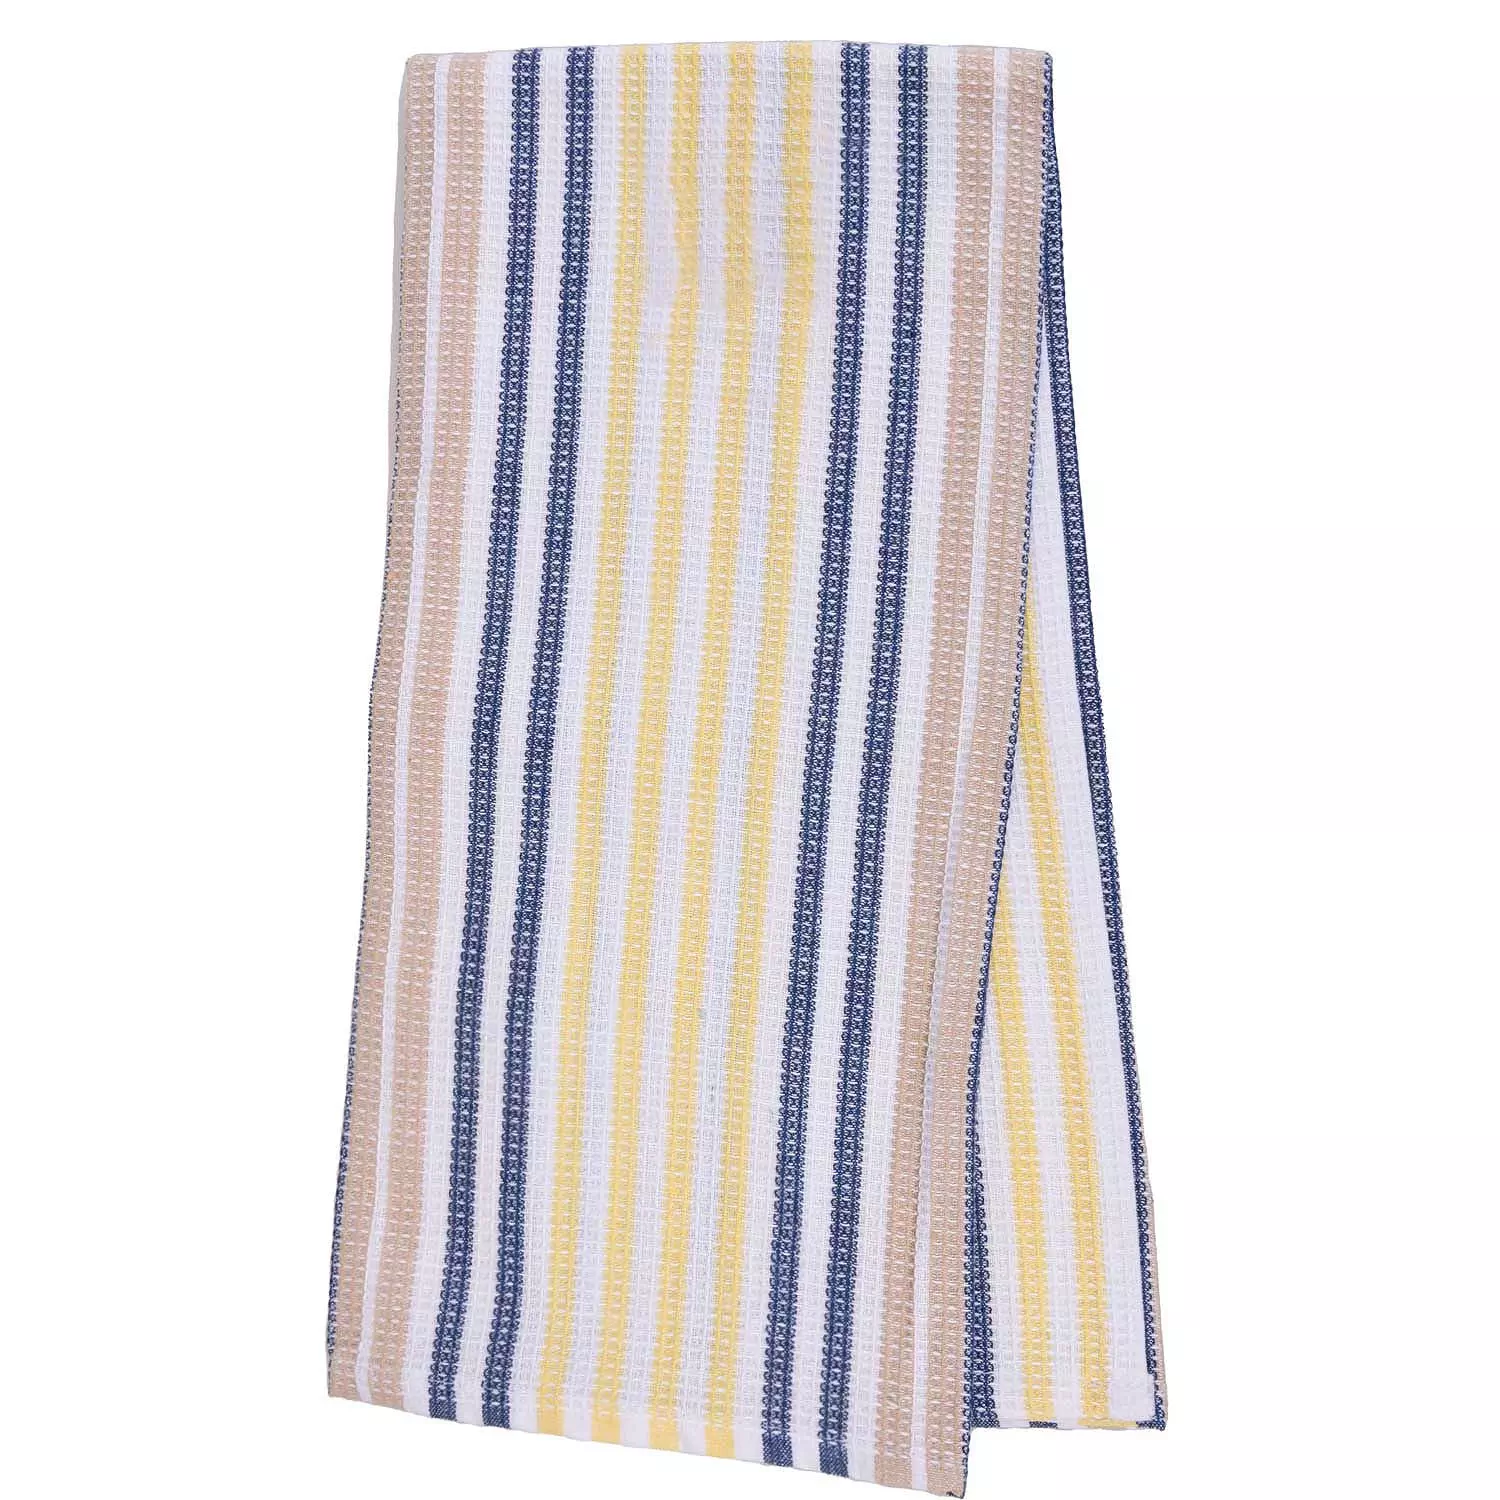 Kitchen towel, 23"x32", yellow and blue